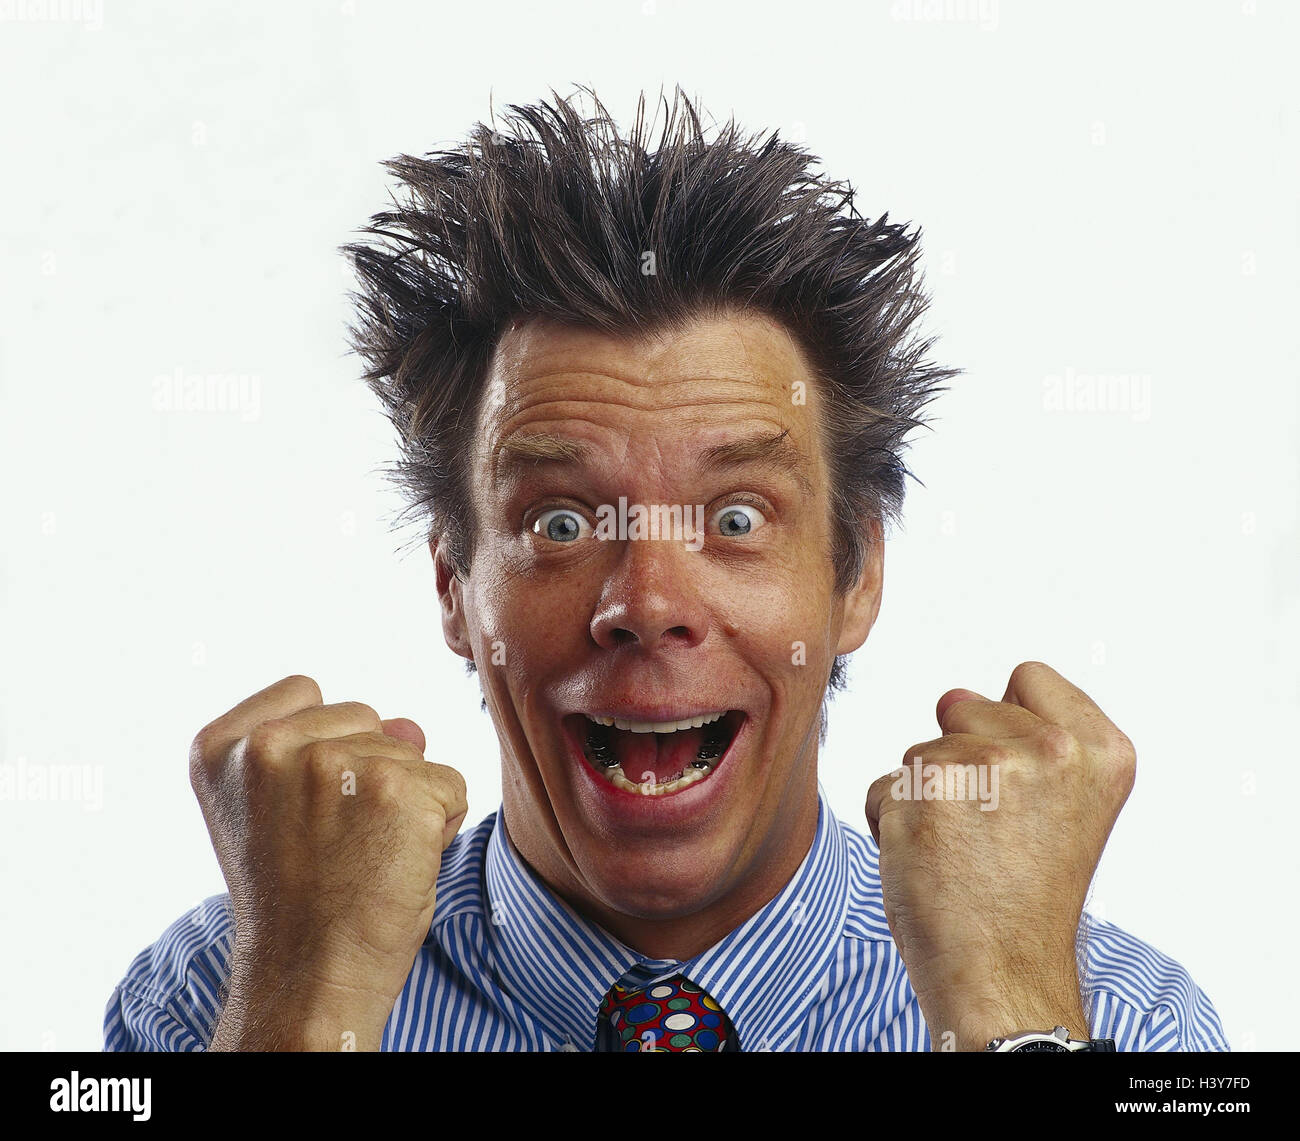 Man, young, hairs, get up, fists, gesture, joy, cheering, portrait, enthusiasm, surprise, melted, fist, victory, triumph, victory joy, cut out Stock Photo